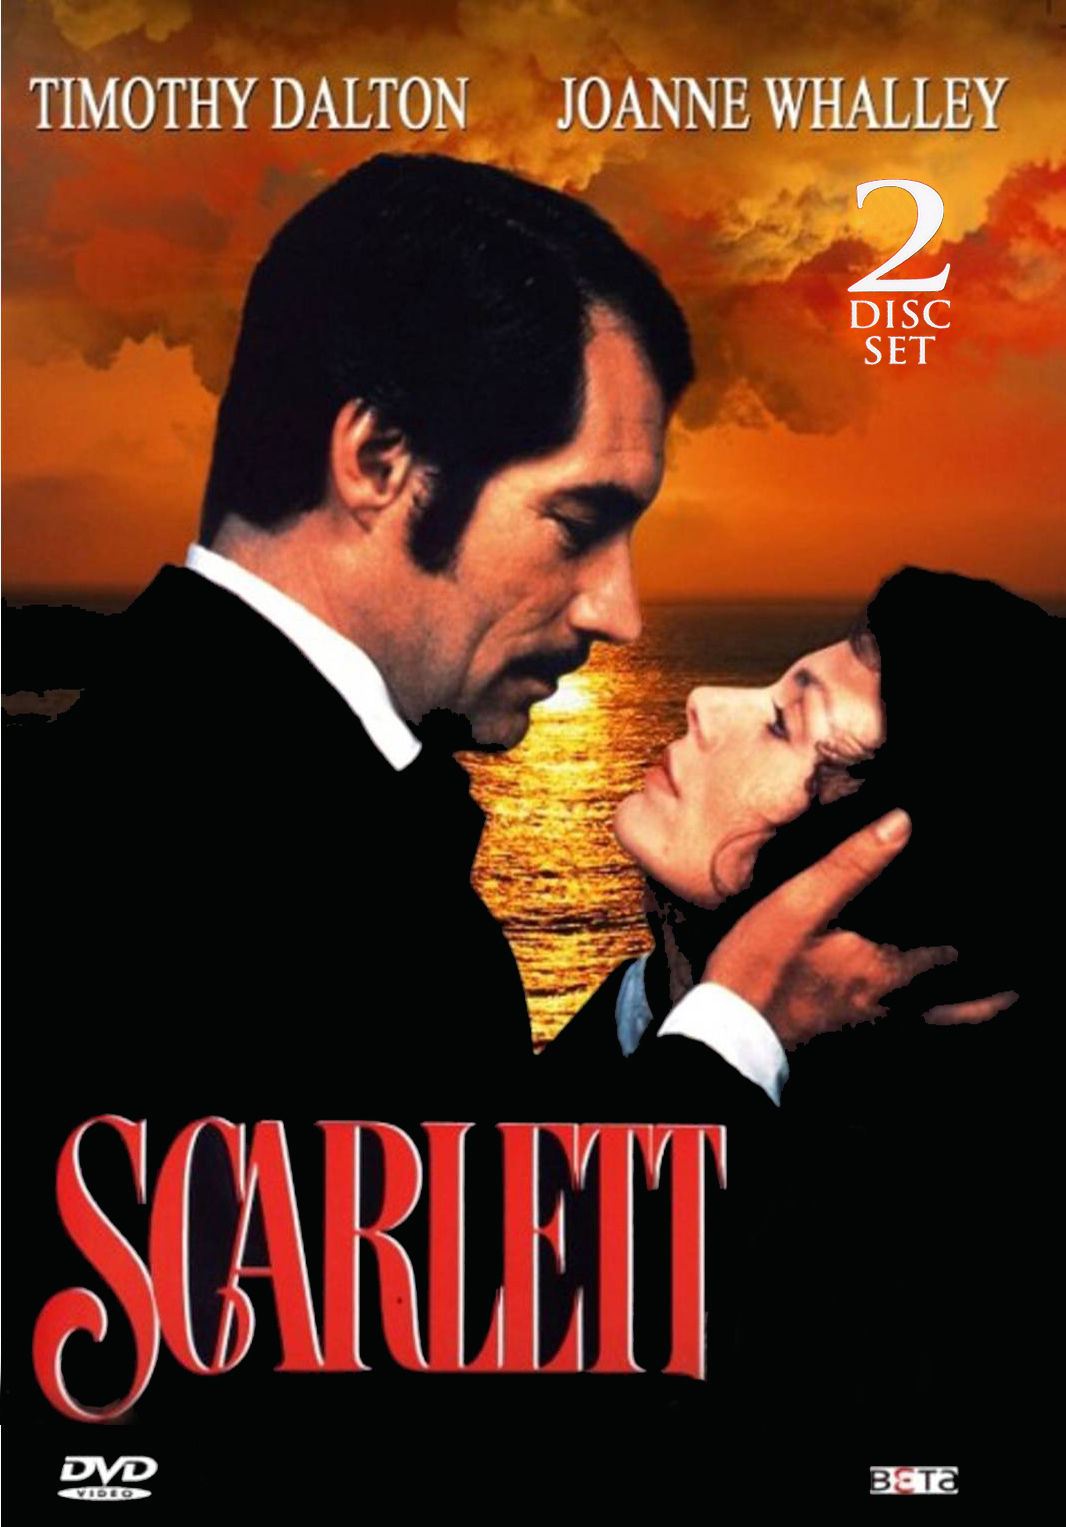 Scarlett The Gone With The Wind Sequel Timothy Dalton DVD TV Mini Series  New!